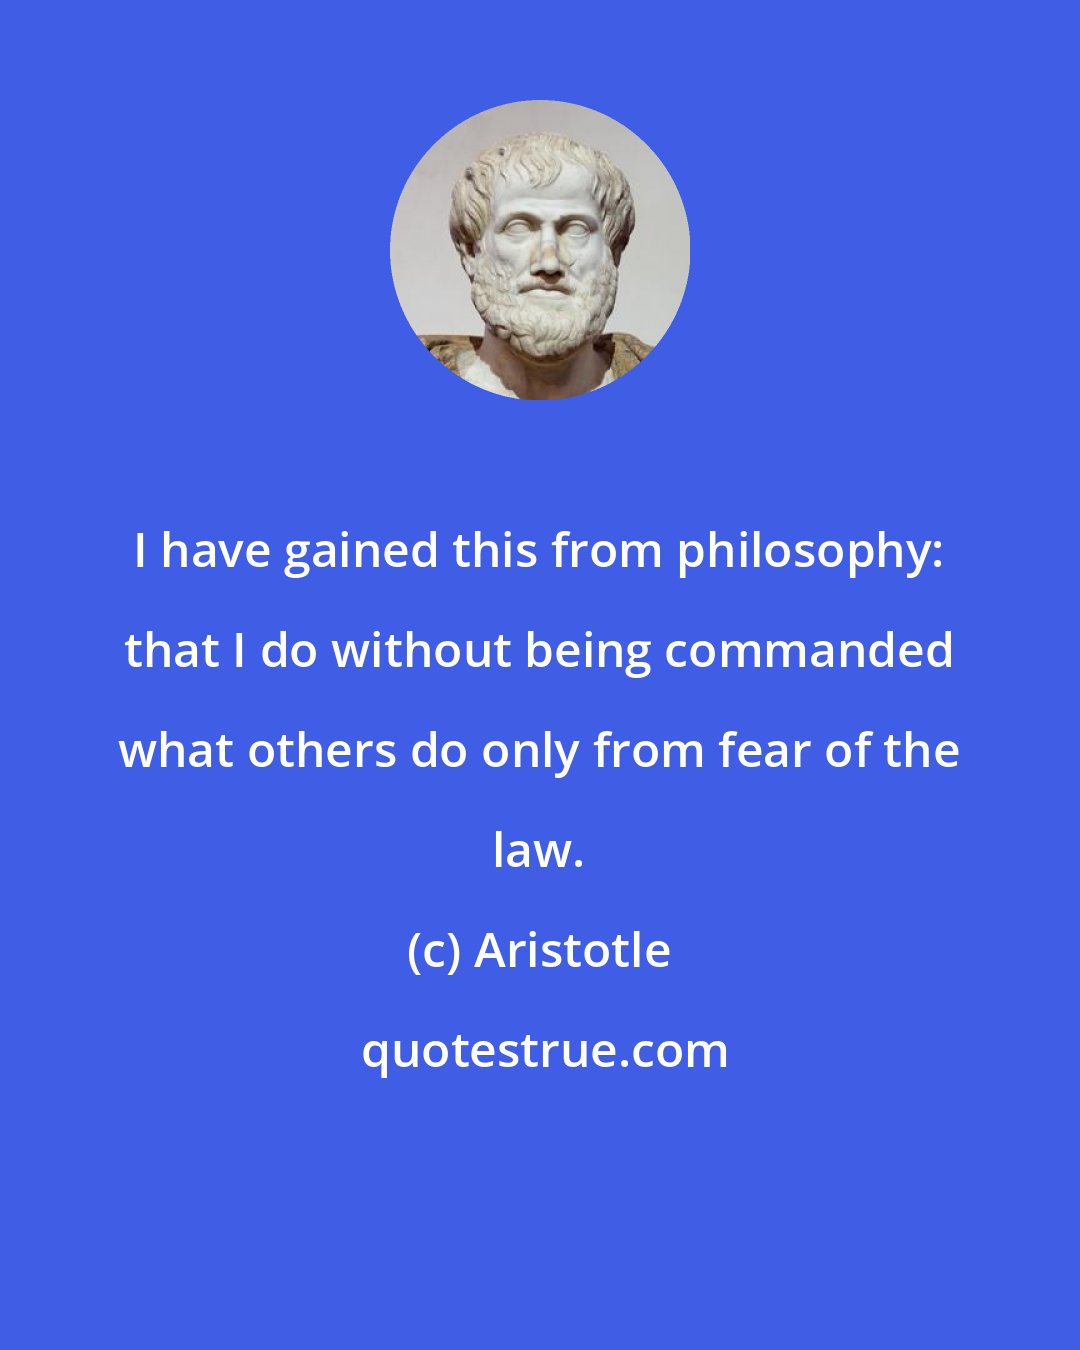 Aristotle: I have gained this from philosophy: that I do without being commanded what others do only from fear of the law.